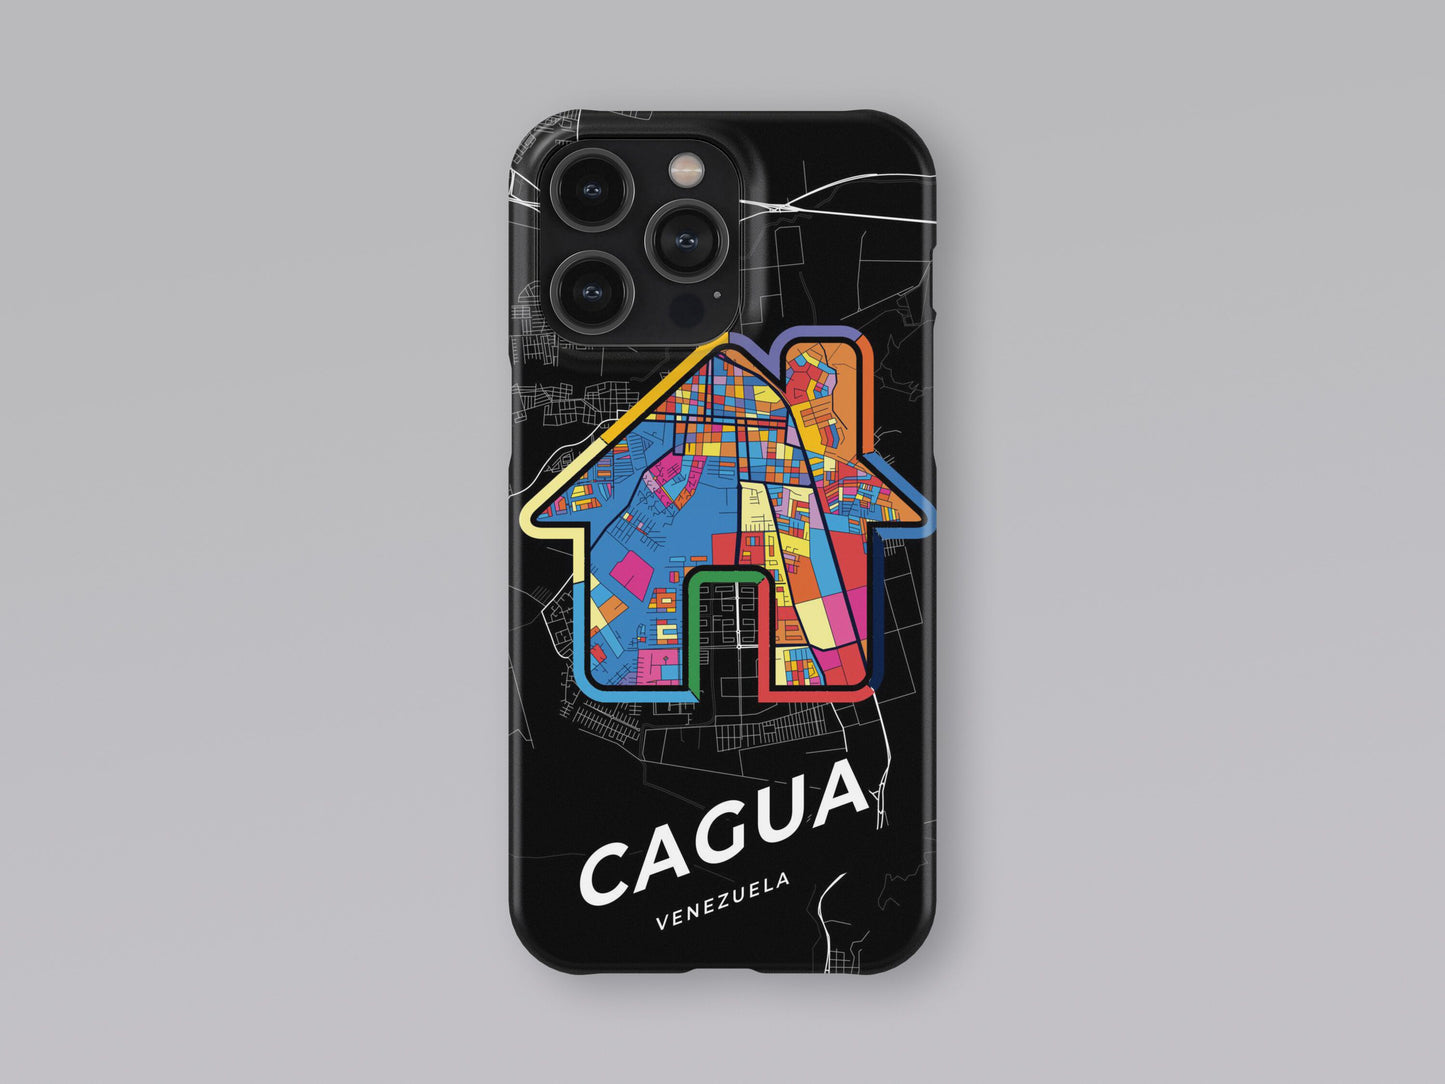 Cagua Venezuela slim phone case with colorful icon. Birthday, wedding or housewarming gift. Couple match cases. 3